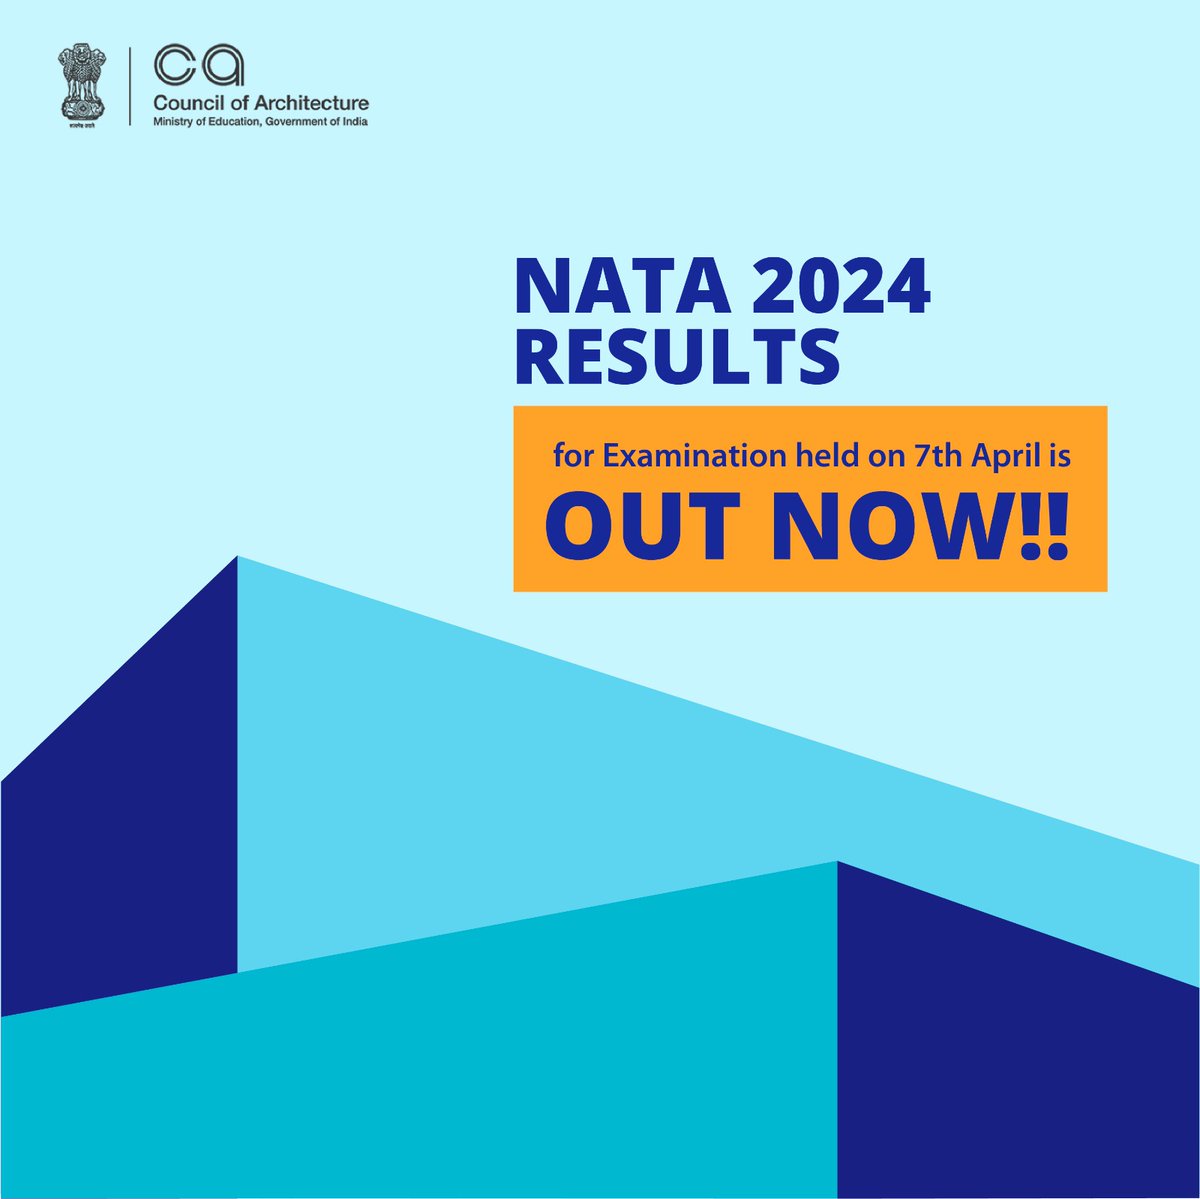 NATA 2024 results for the examination conducted on April 7th are now live. Did you make the cut? Check your scores now!

#NATA2024 #ExamResults #resultsday #councilofarchitecture